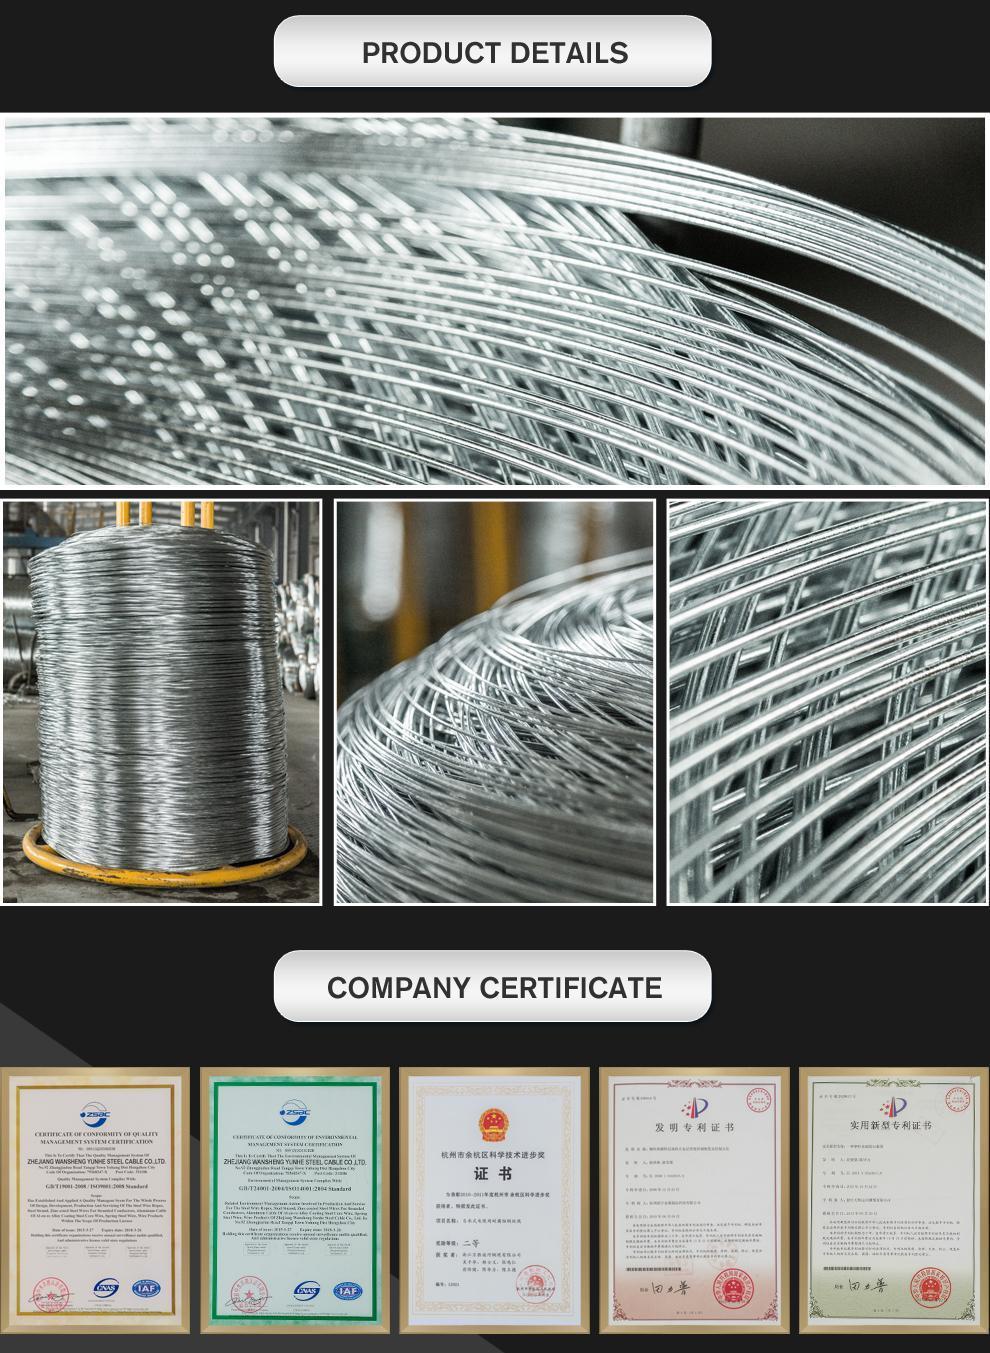 ASTM Standard 1450MPa High Tensil Strength Zinc Coating Steel Wire for Aluminium Clad Core